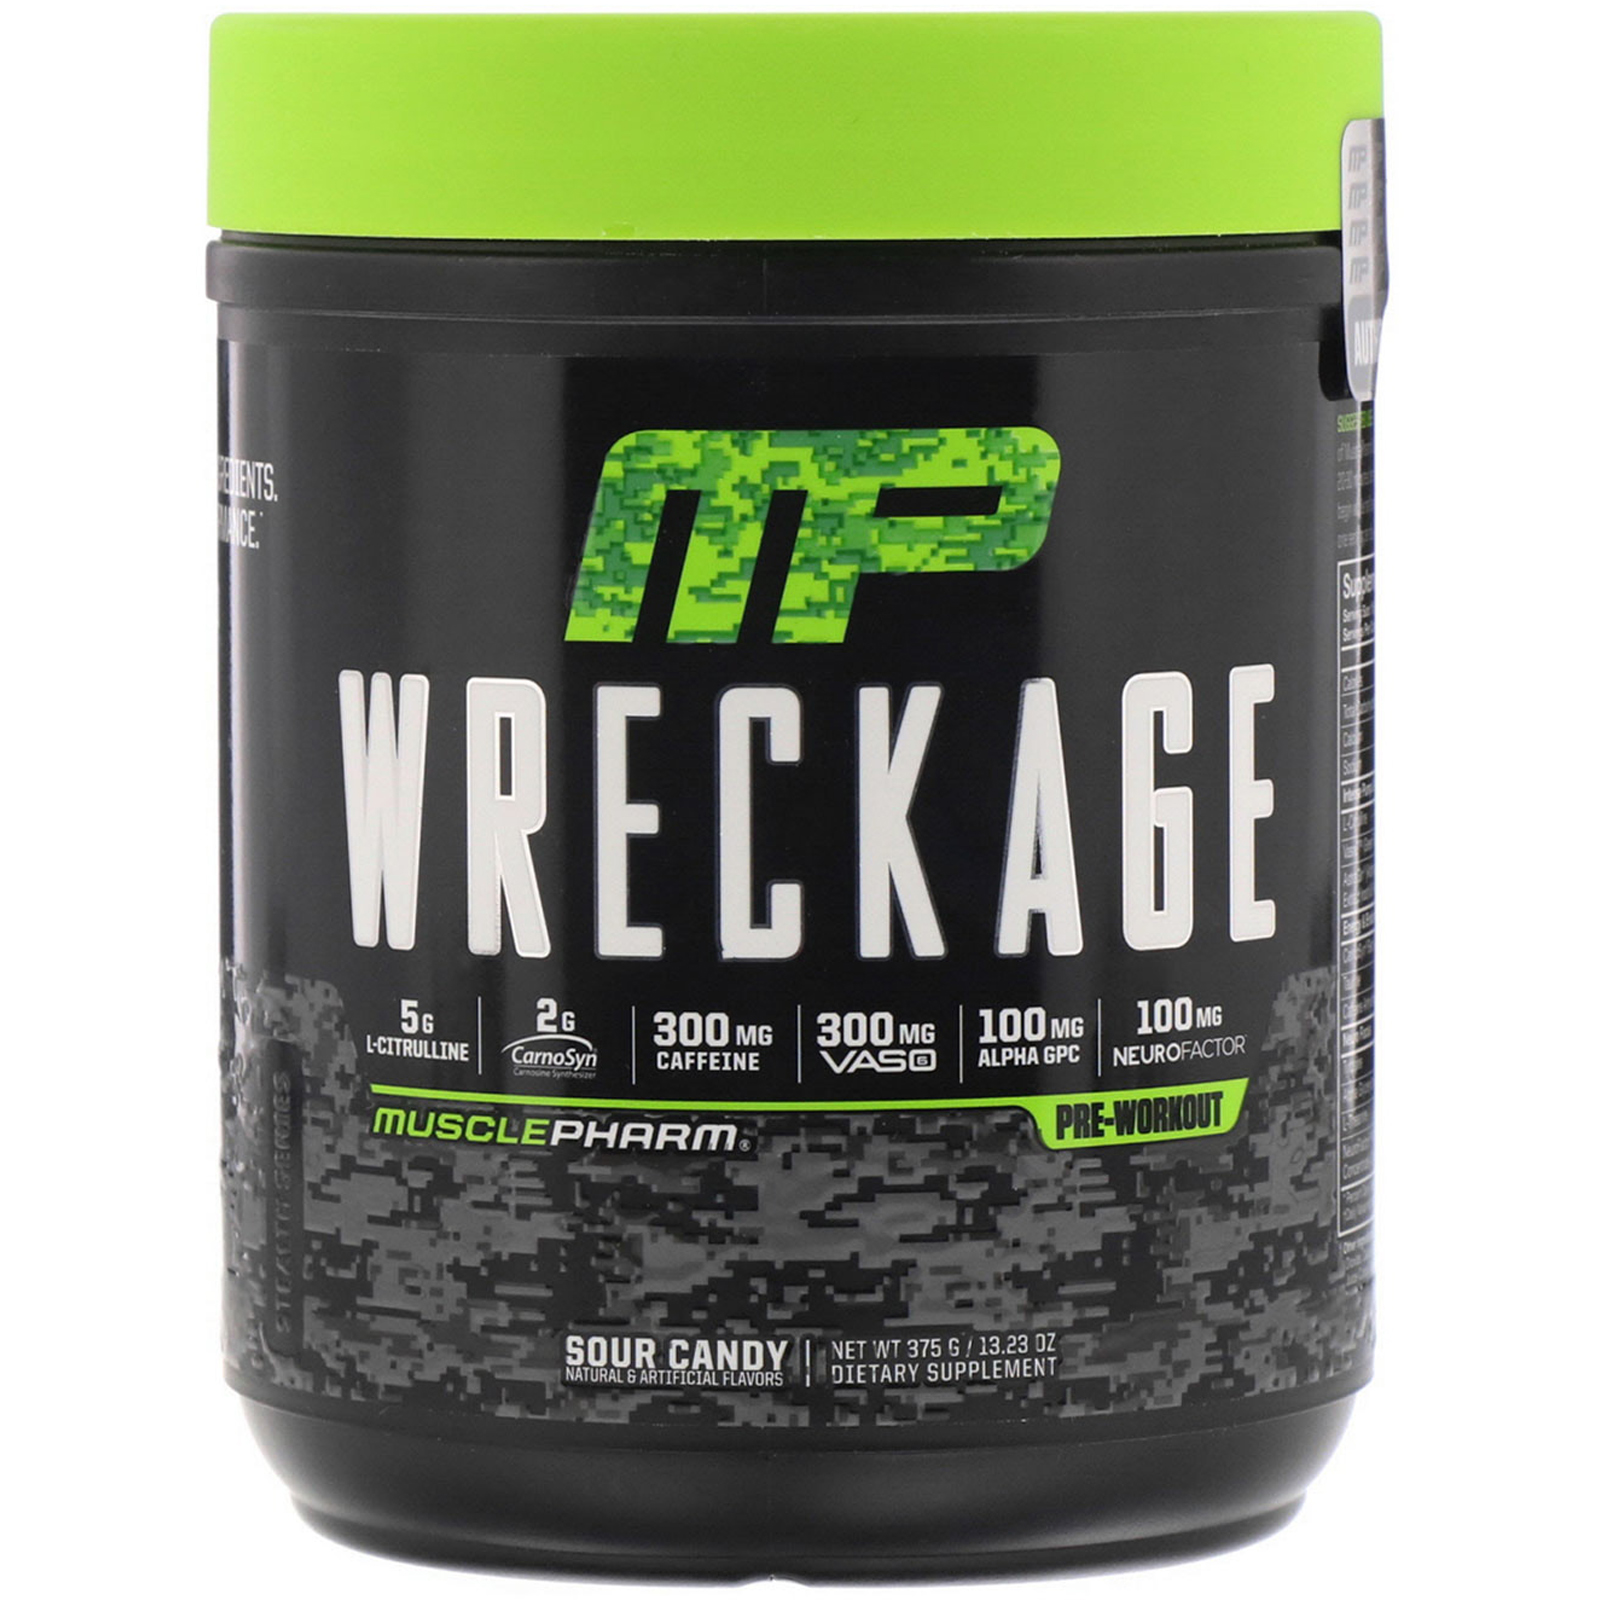 6 Day Musclepharm Pre Workout Wreckage with Comfort Workout Clothes